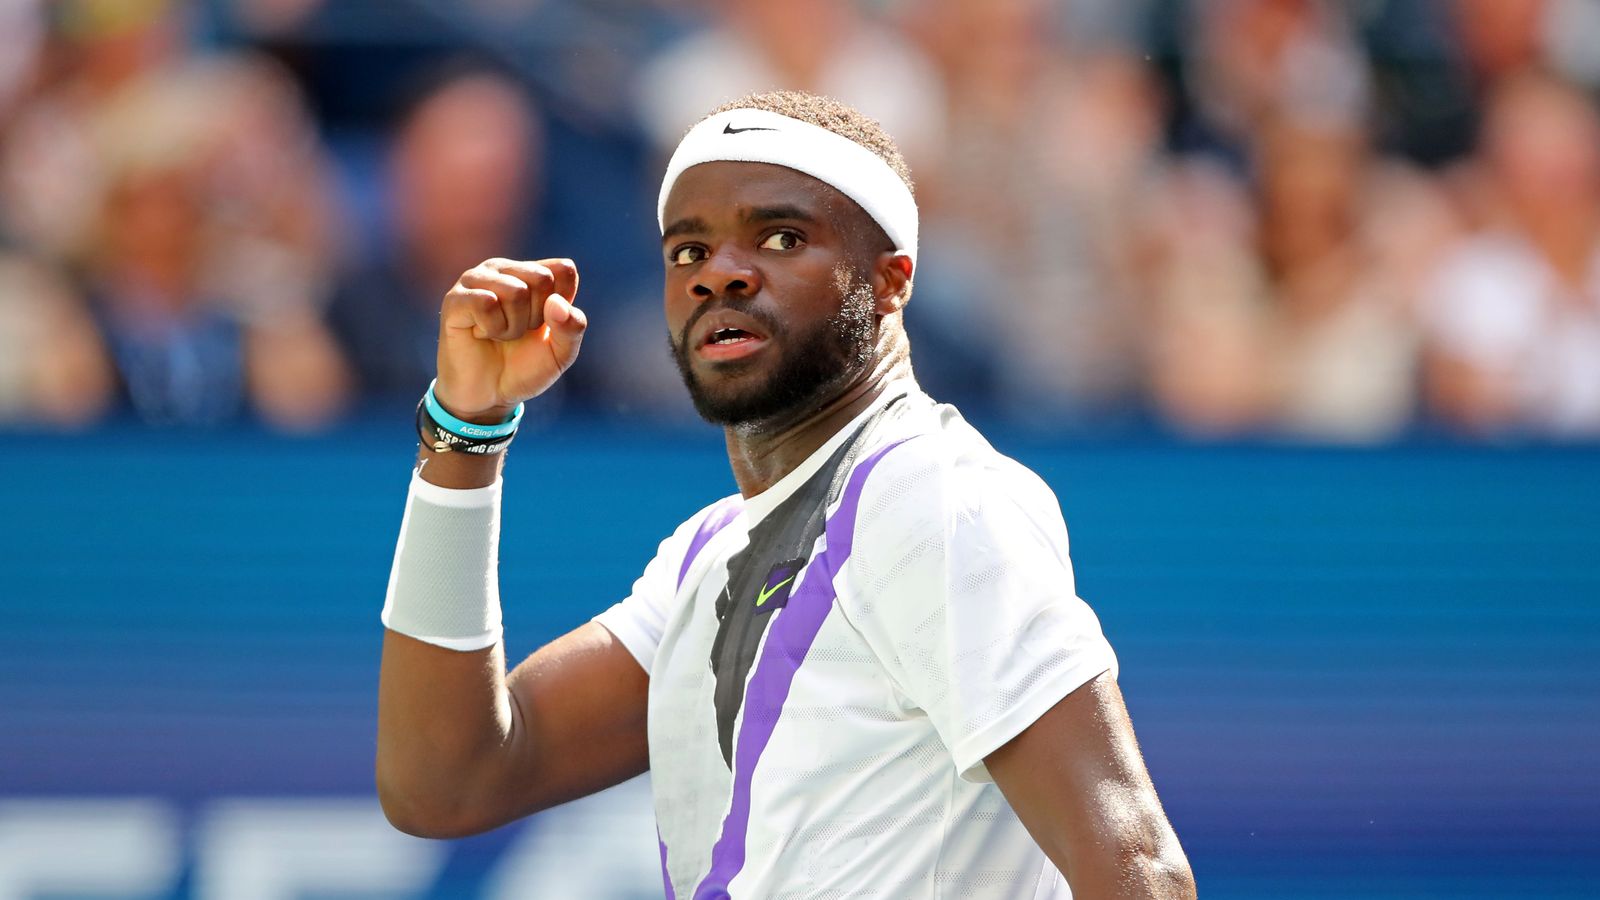 Frances Tiafoe hoping to inspire more black people to play tennis